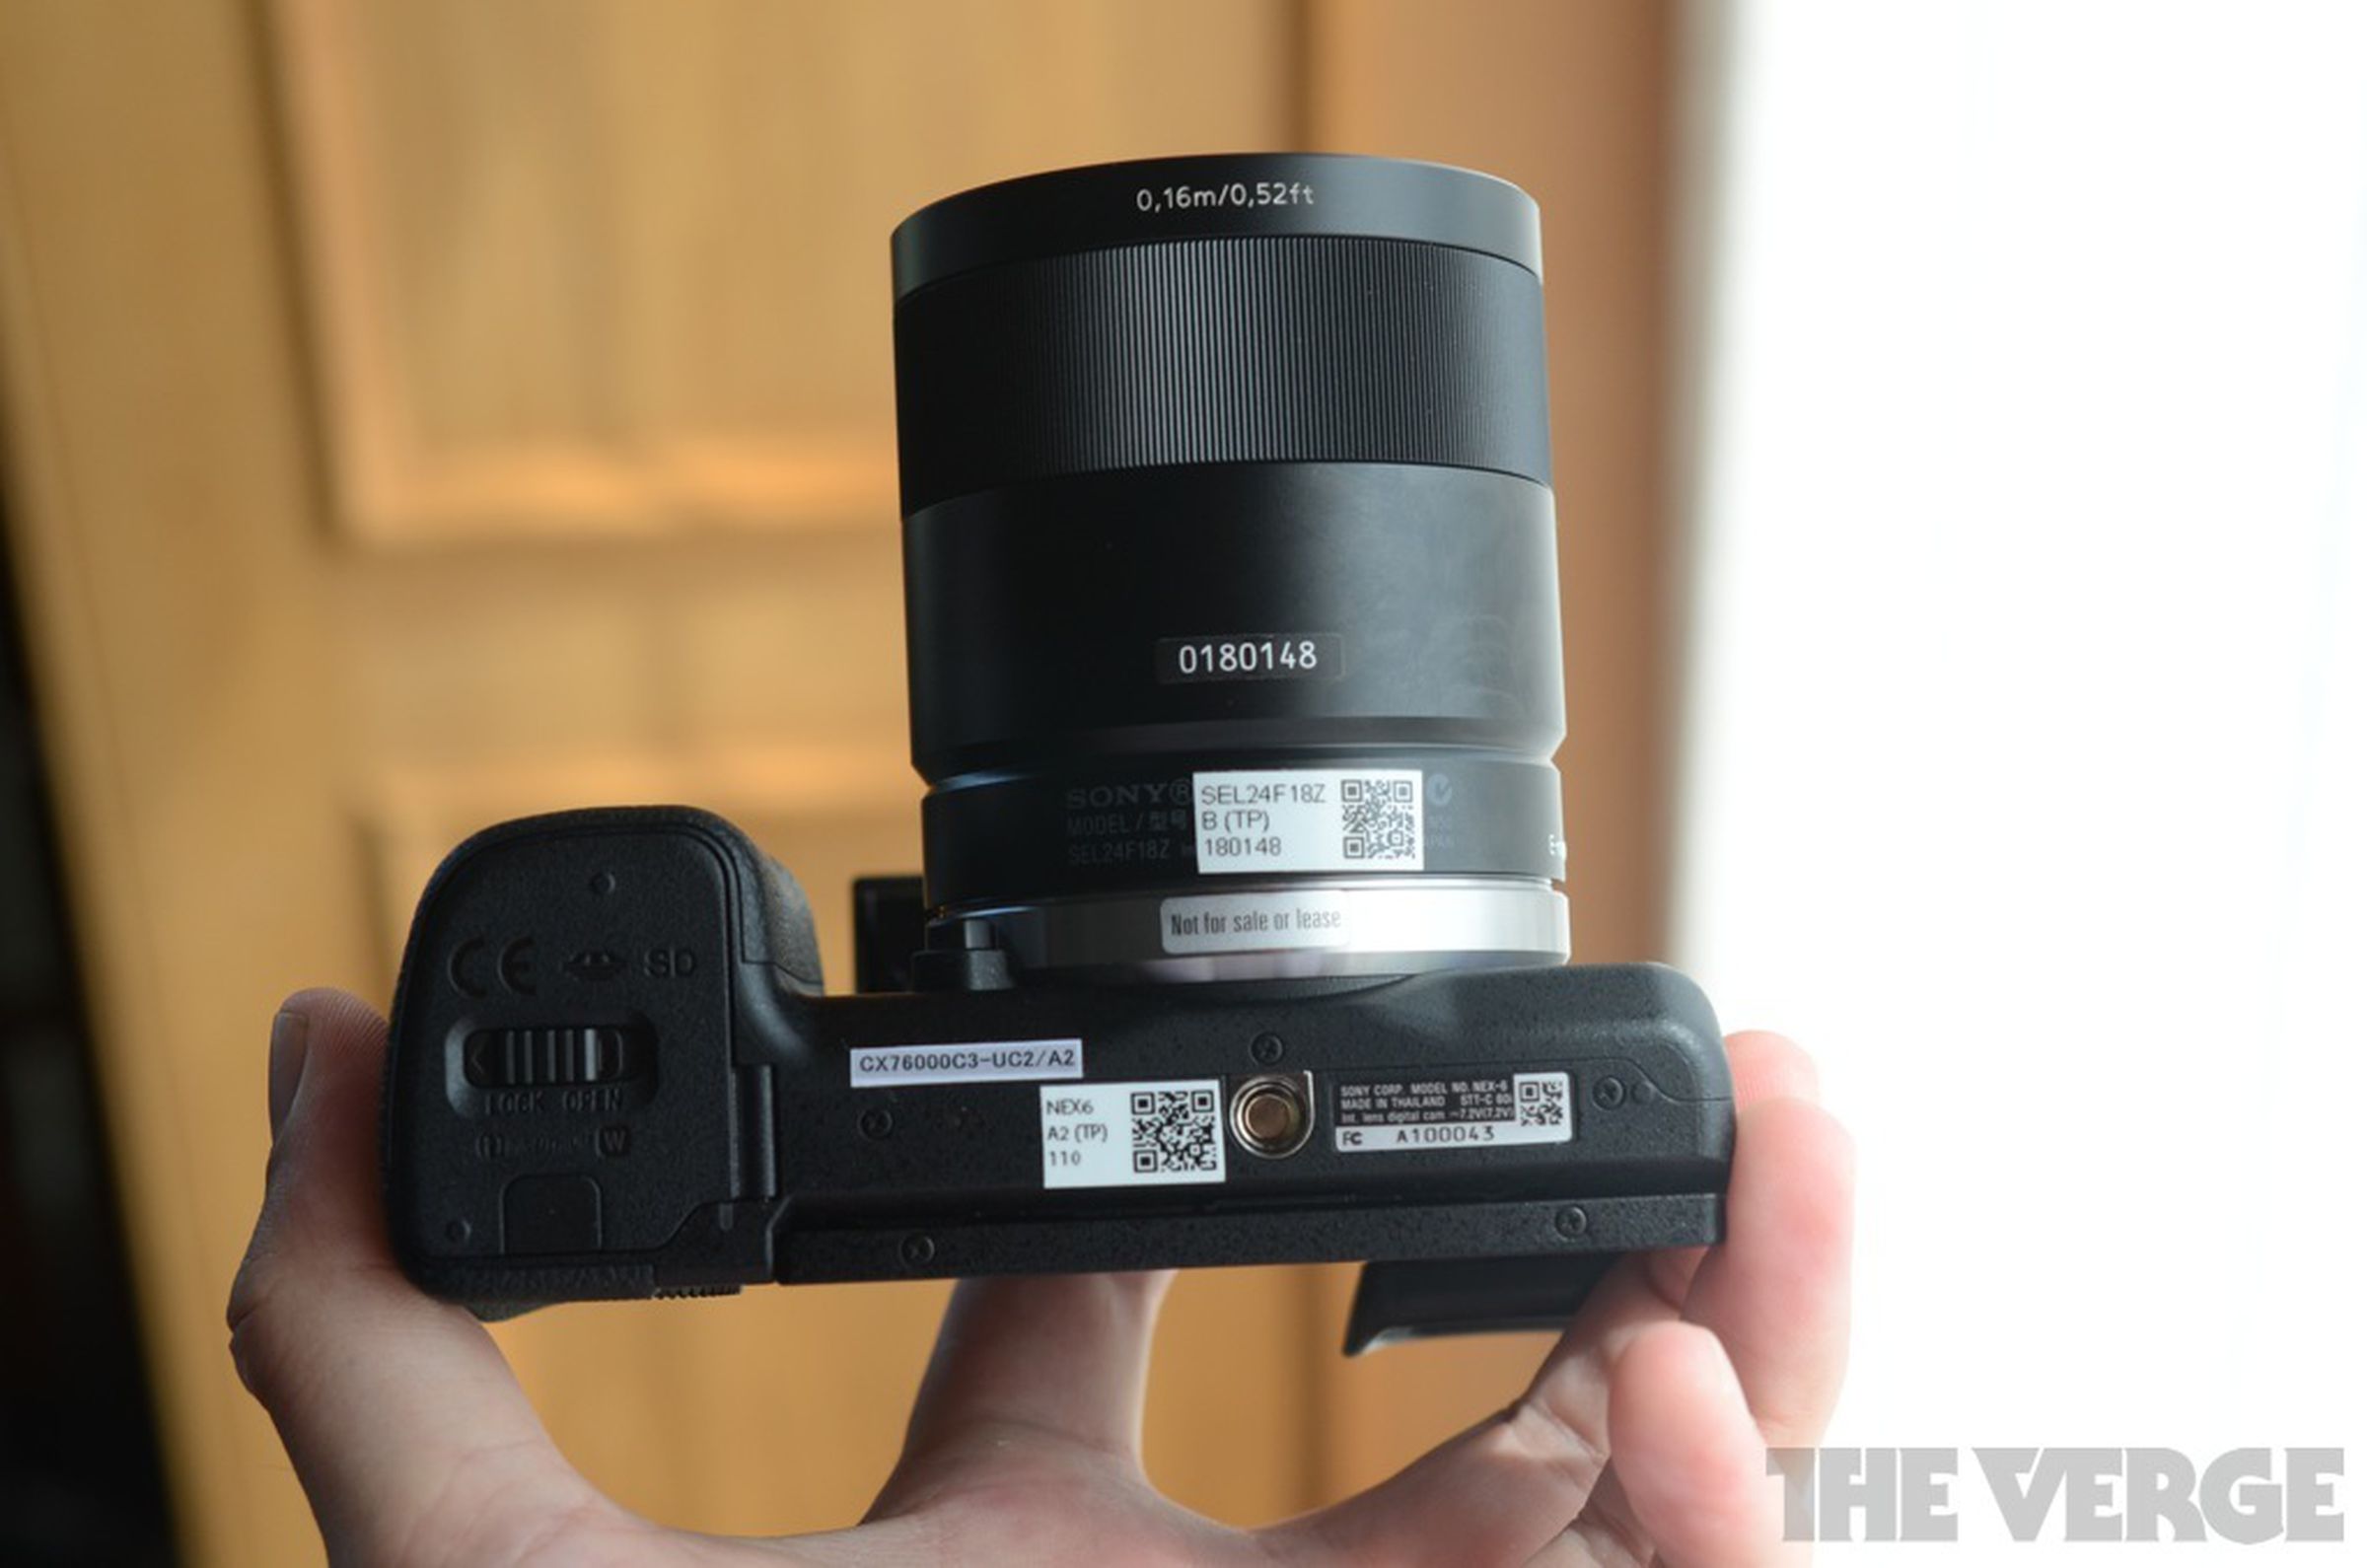 Sony NEX-6 hands-on photos and press shots